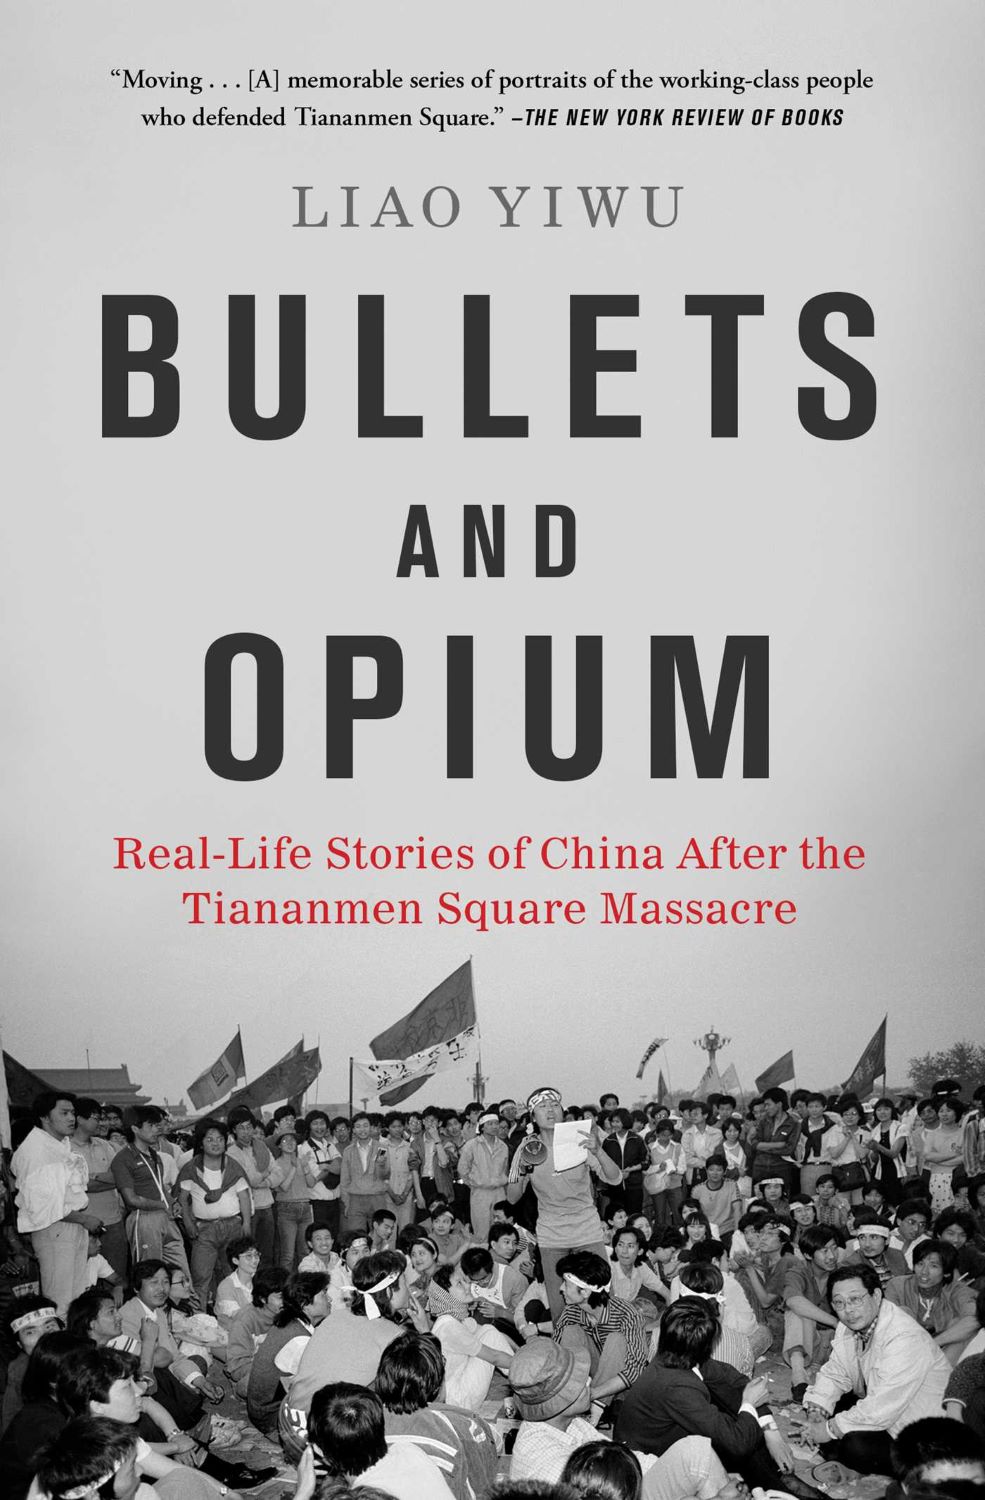 Bullets and Opium by Liao Yiwu